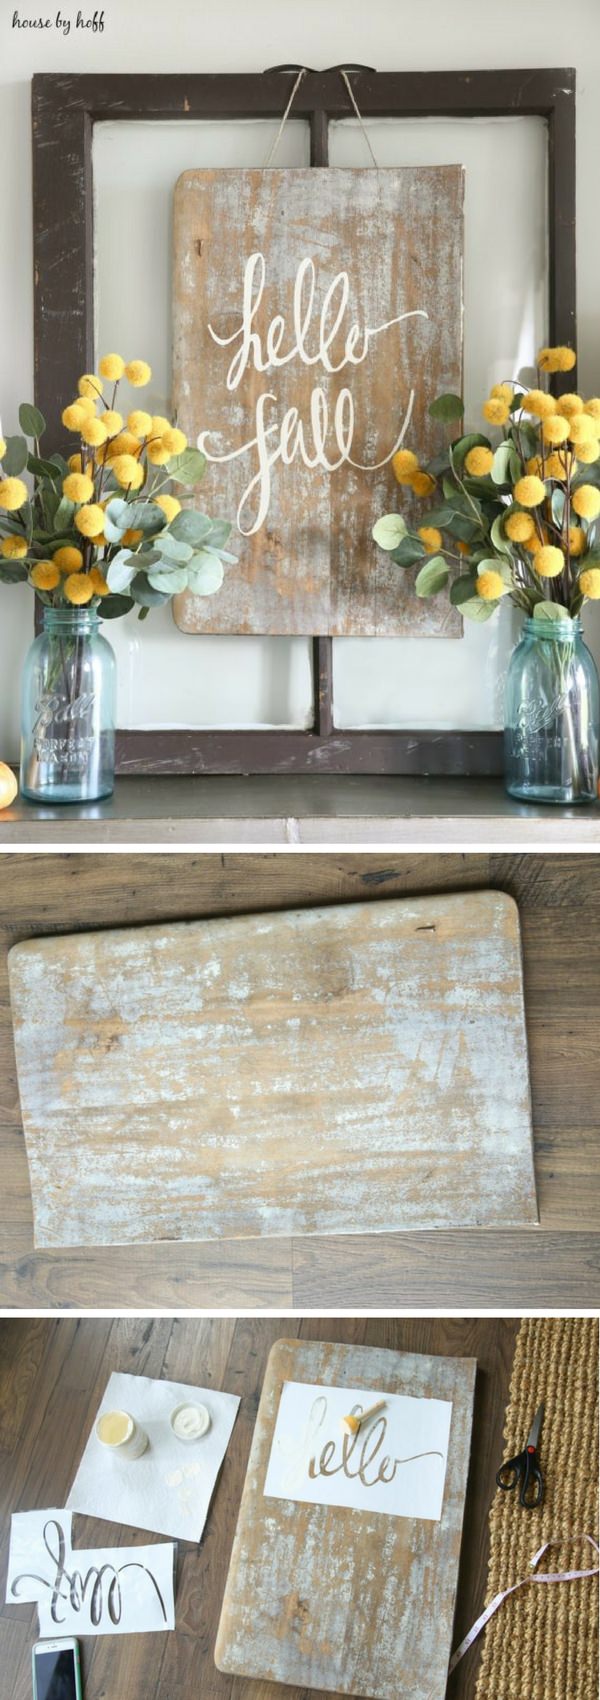 Check out 17 fabulous DIY projects to bring this idea to life.